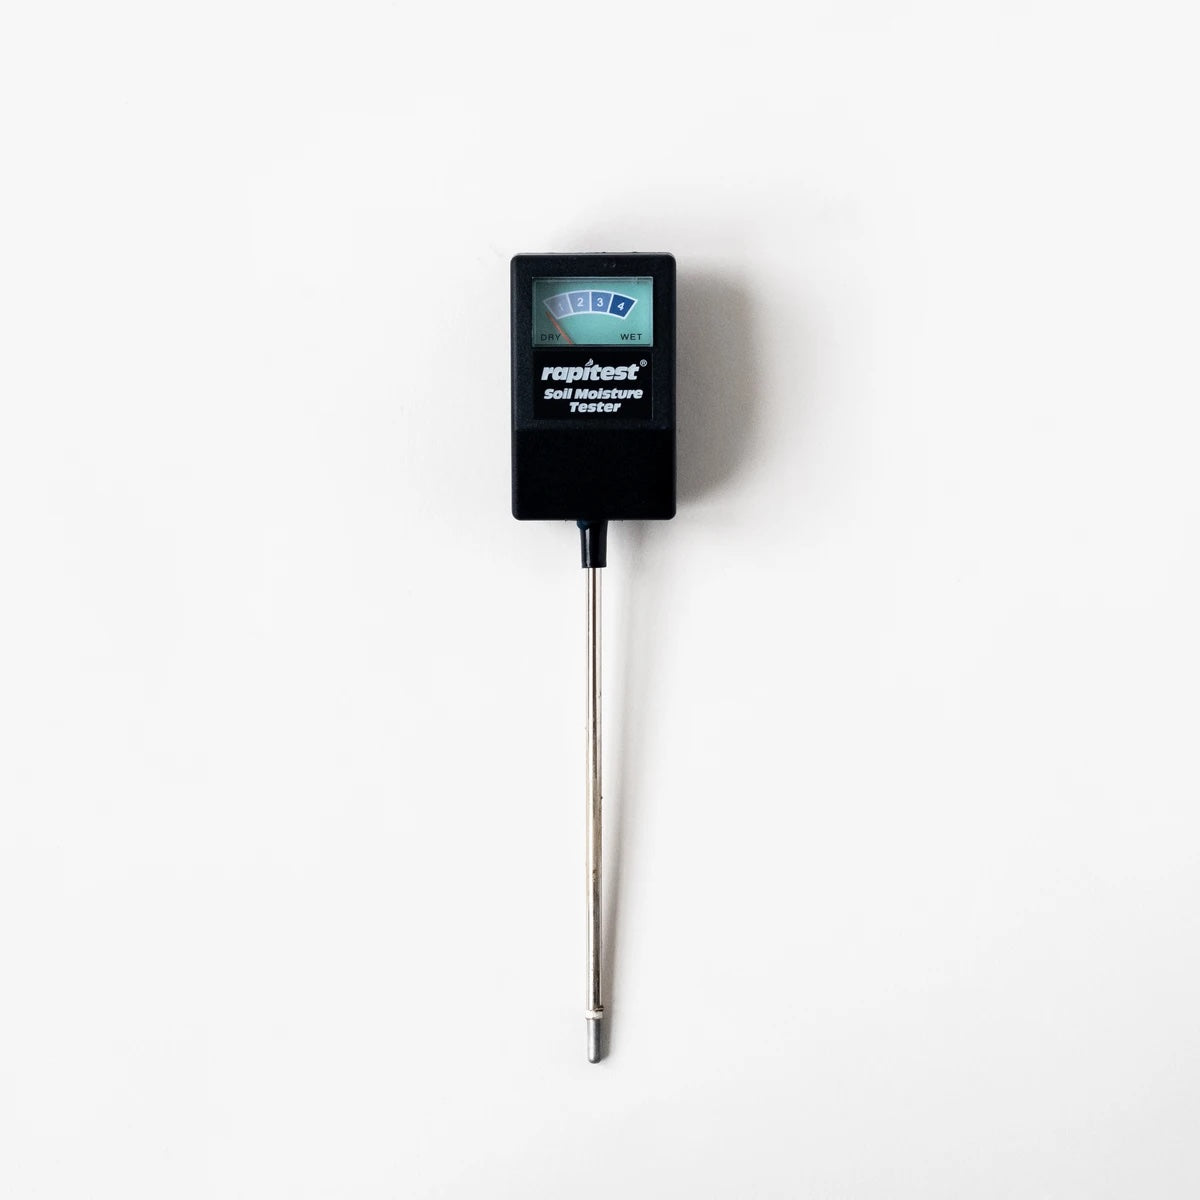 A moisture meter. It is black with a clear screen displaying a meter. The rest of the tool is silver.